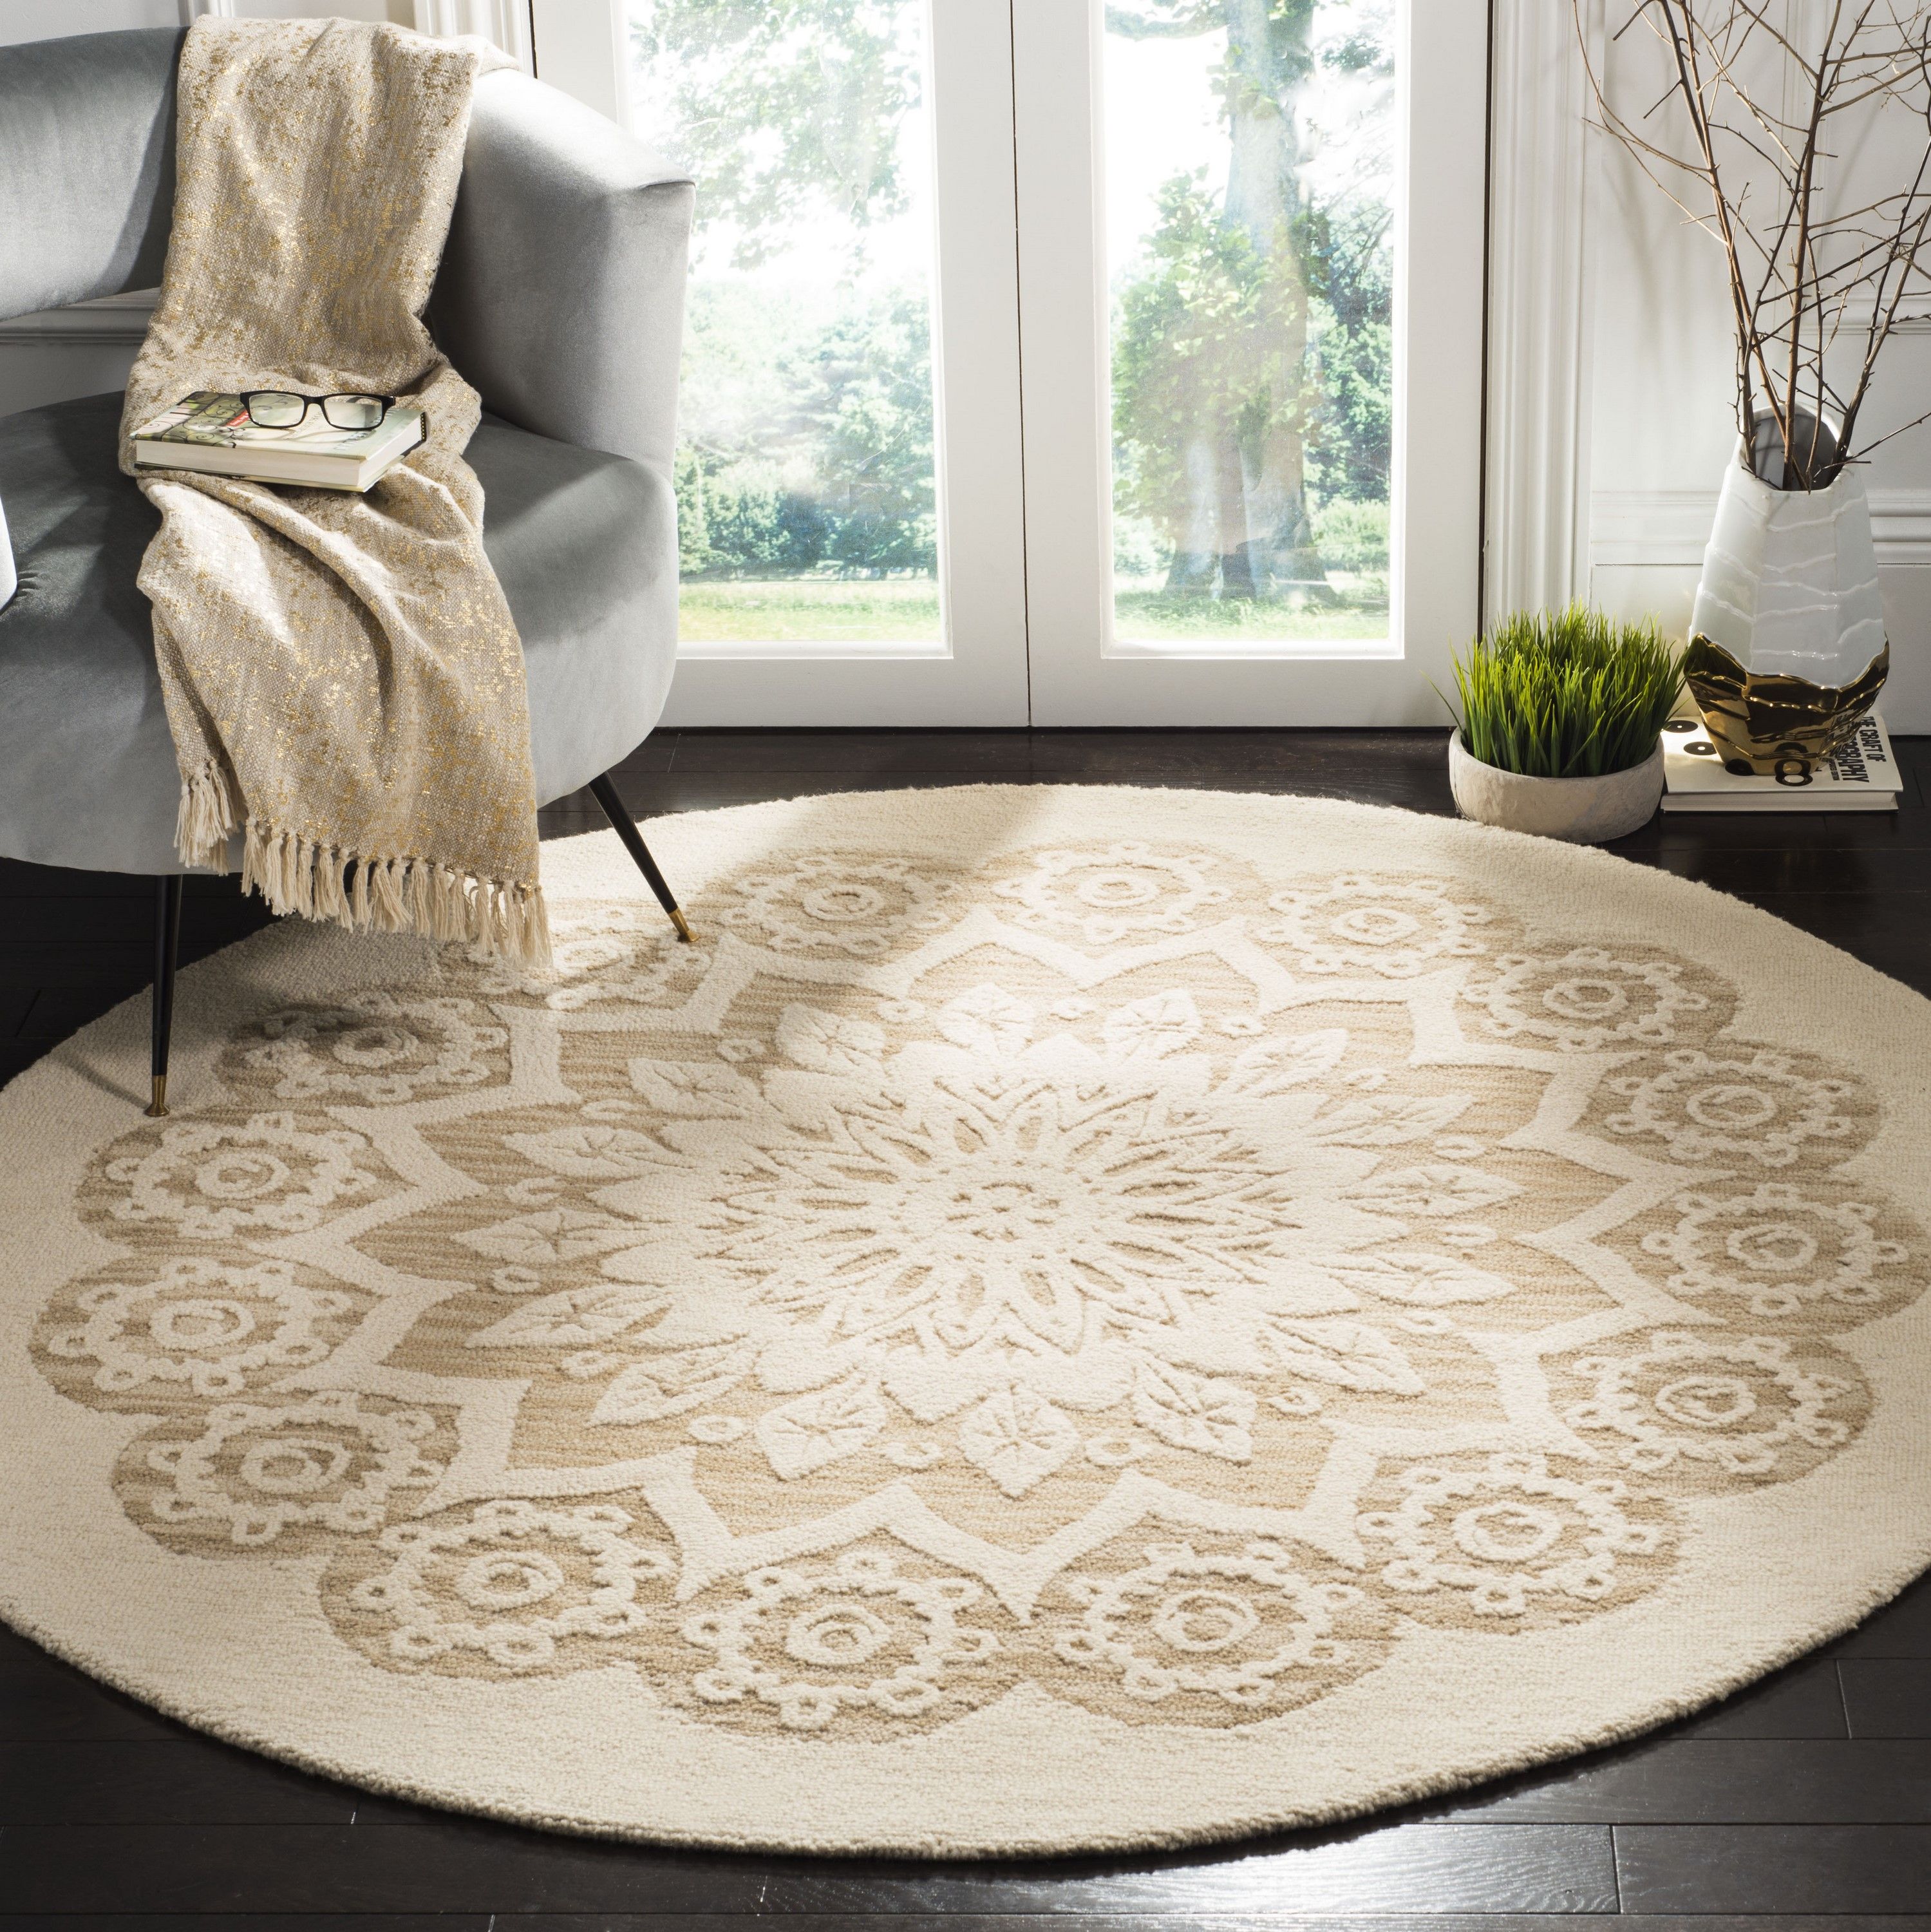 Safavieh Blossom Gladwin 6 X 6 Wool Ivory/Beige Round Indoor  Floral/Botanical Bohemian/Eclectic Area Rug In The Rugs Department At  Lowes For Ivory Blossom Round Rugs (View 5 of 15)